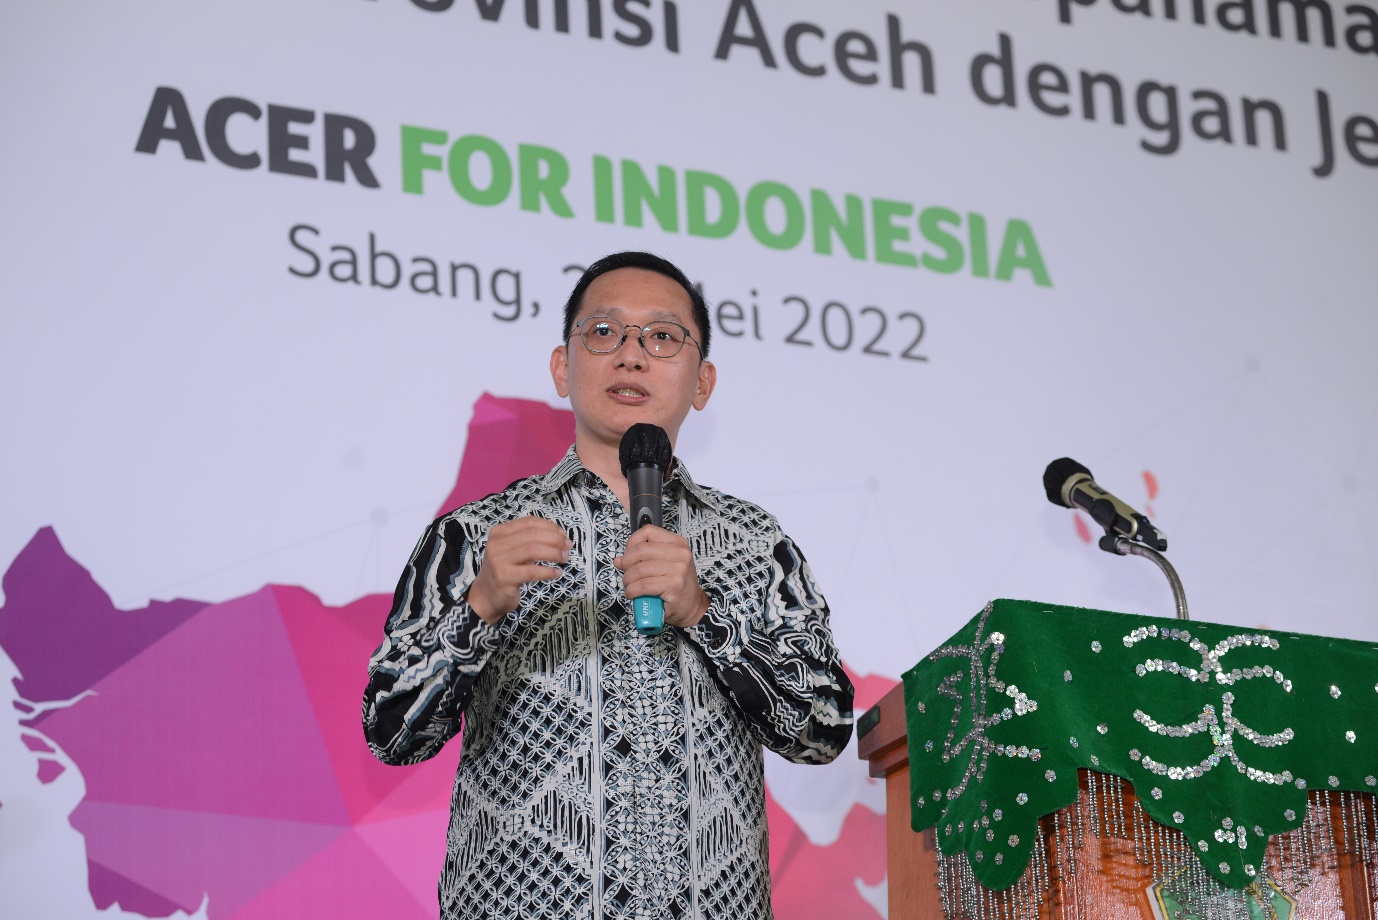 Herbet Ang, President Director, Acer Indonesia